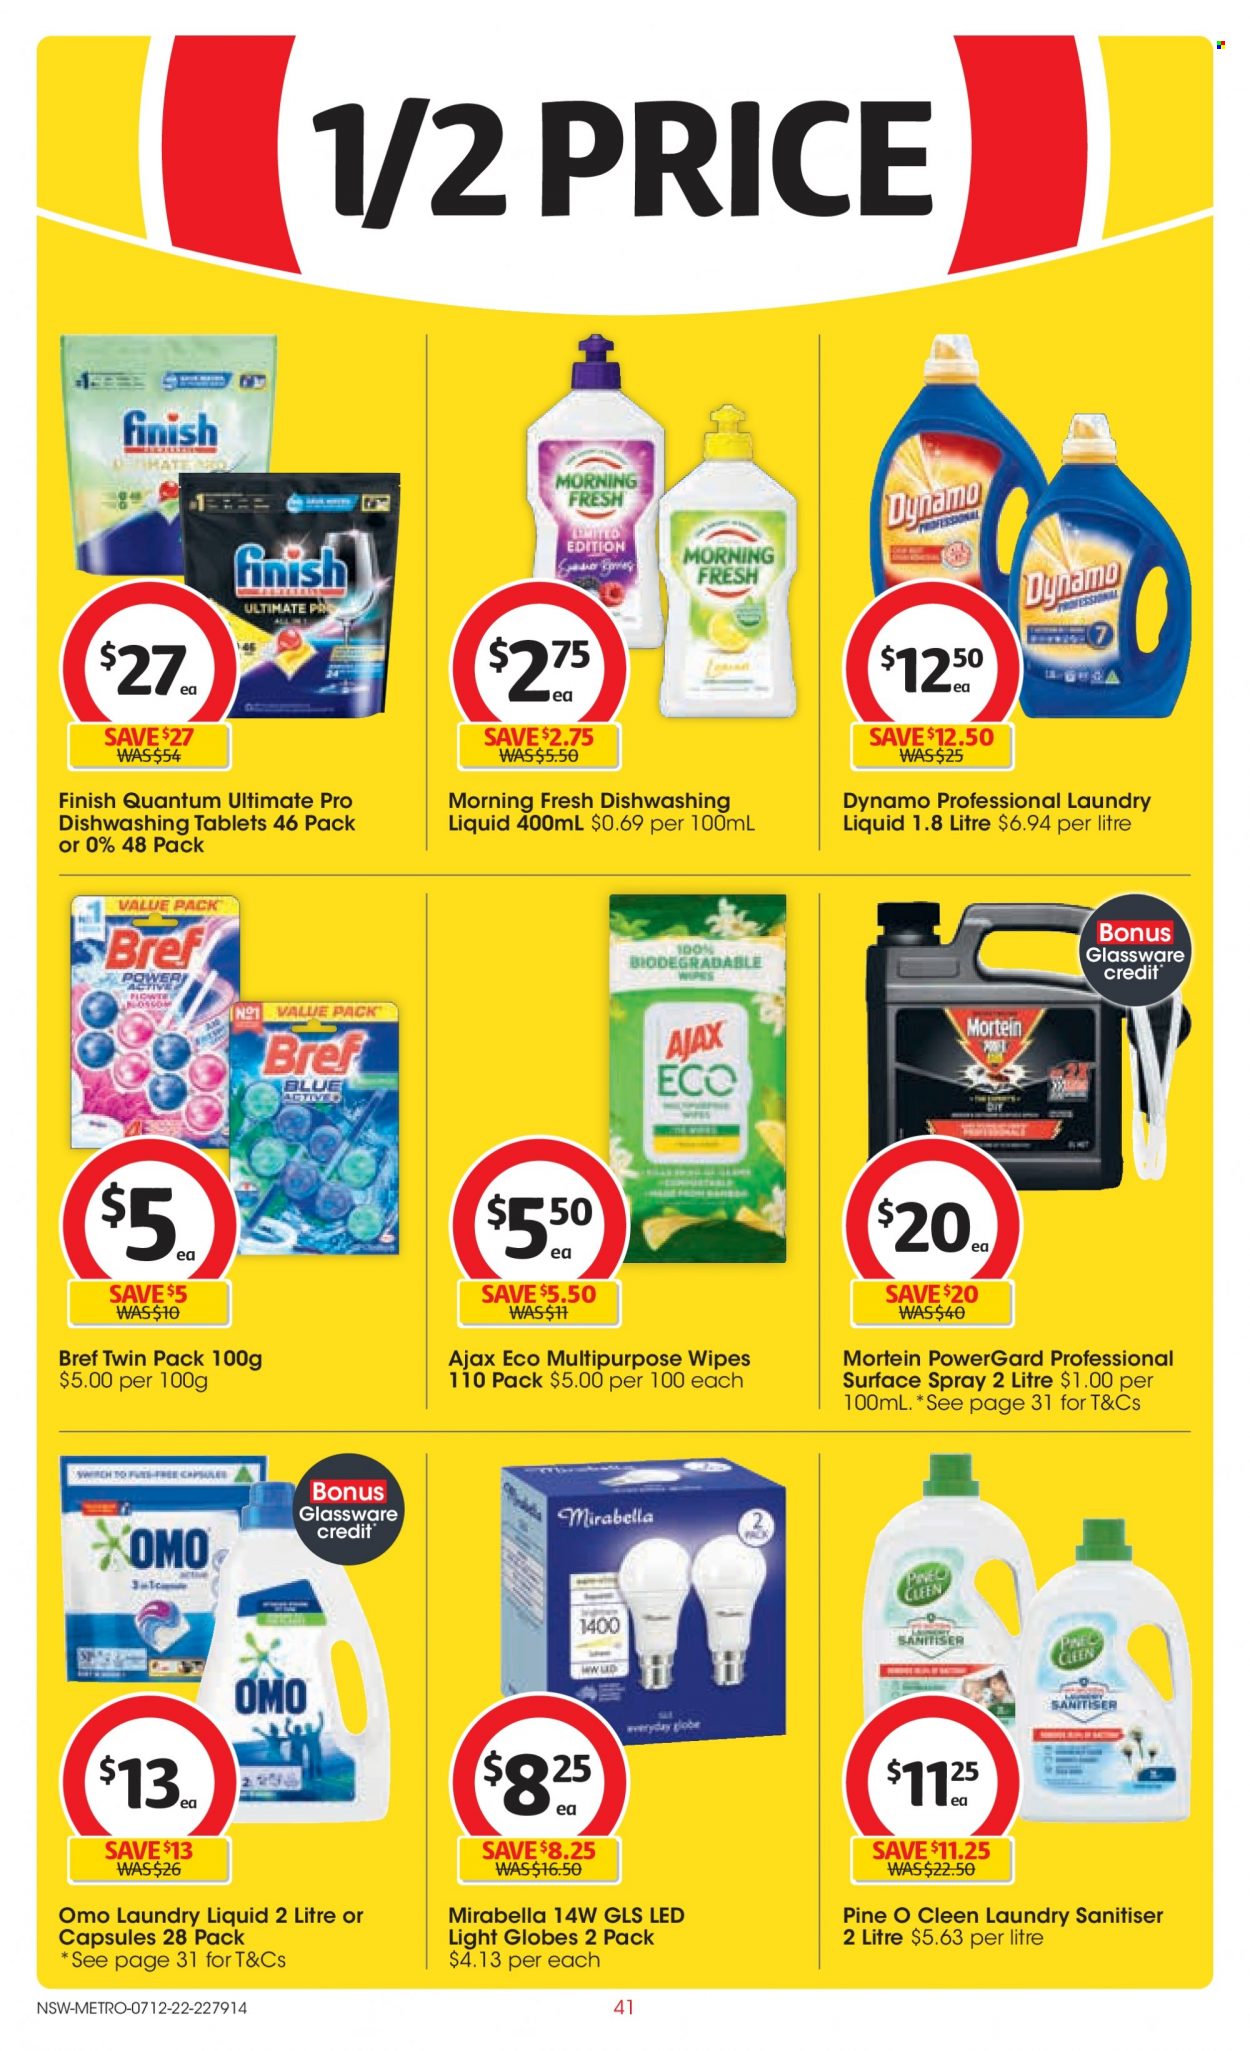 thumbnail - Coles Catalogue - 7 Dec 2022 - 13 Dec 2022 - Sales products - switch, wipes, multipurpose wipes, Bref Power, Ajax Eco, Mortein, Ajax, Omo, laundry detergent, dishwashing liquid, Finish Powerball, Finish Quantum Ultimate, glassware set, LED light. Page 41.